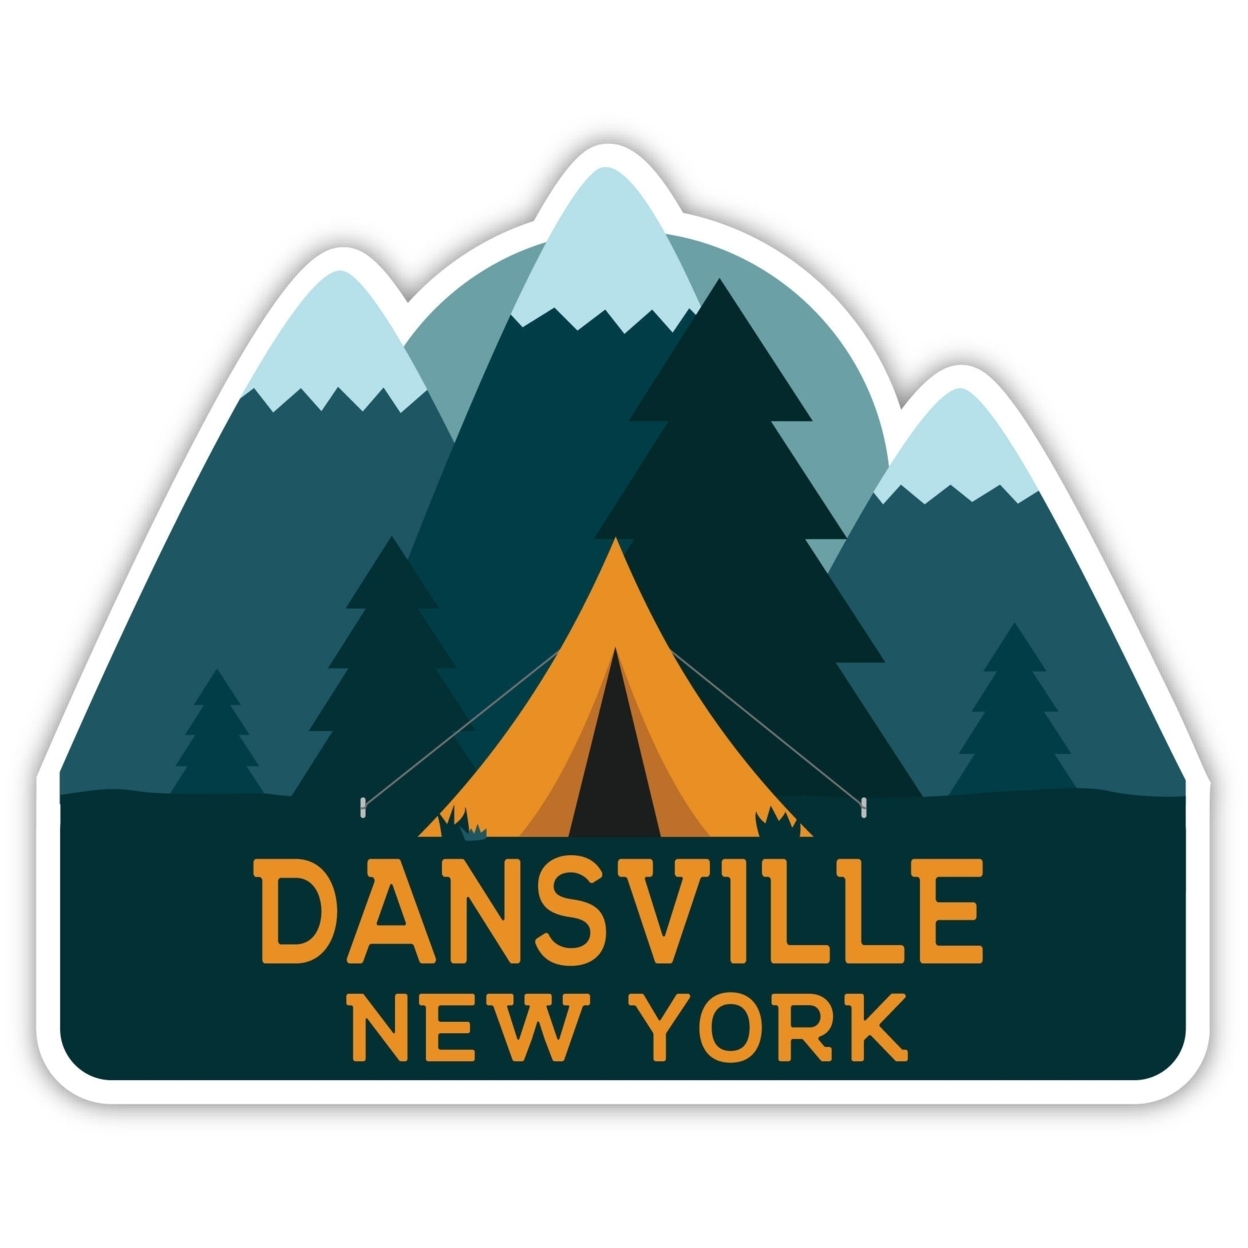 Dansville New York Souvenir Decorative Stickers (Choose Theme And Size) - 4-Pack, 10-Inch, Tent